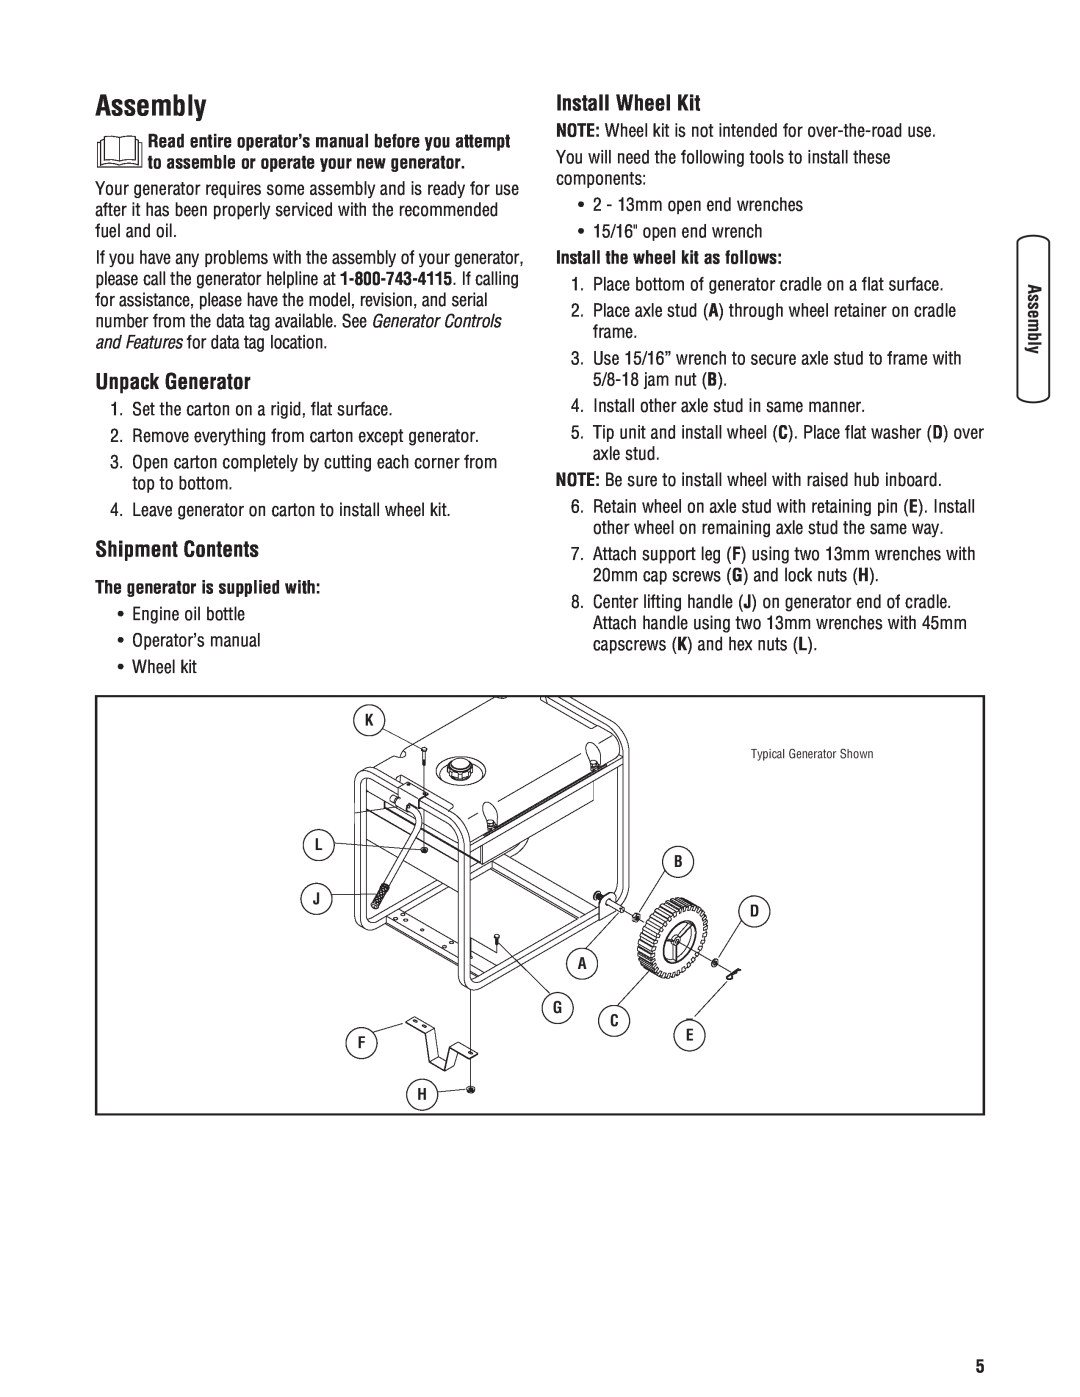 Briggs & Stratton 30348 Assembly, Unpack Generator, Install Wheel Kit, Shipment Contents, Install the wheel kit as follows 